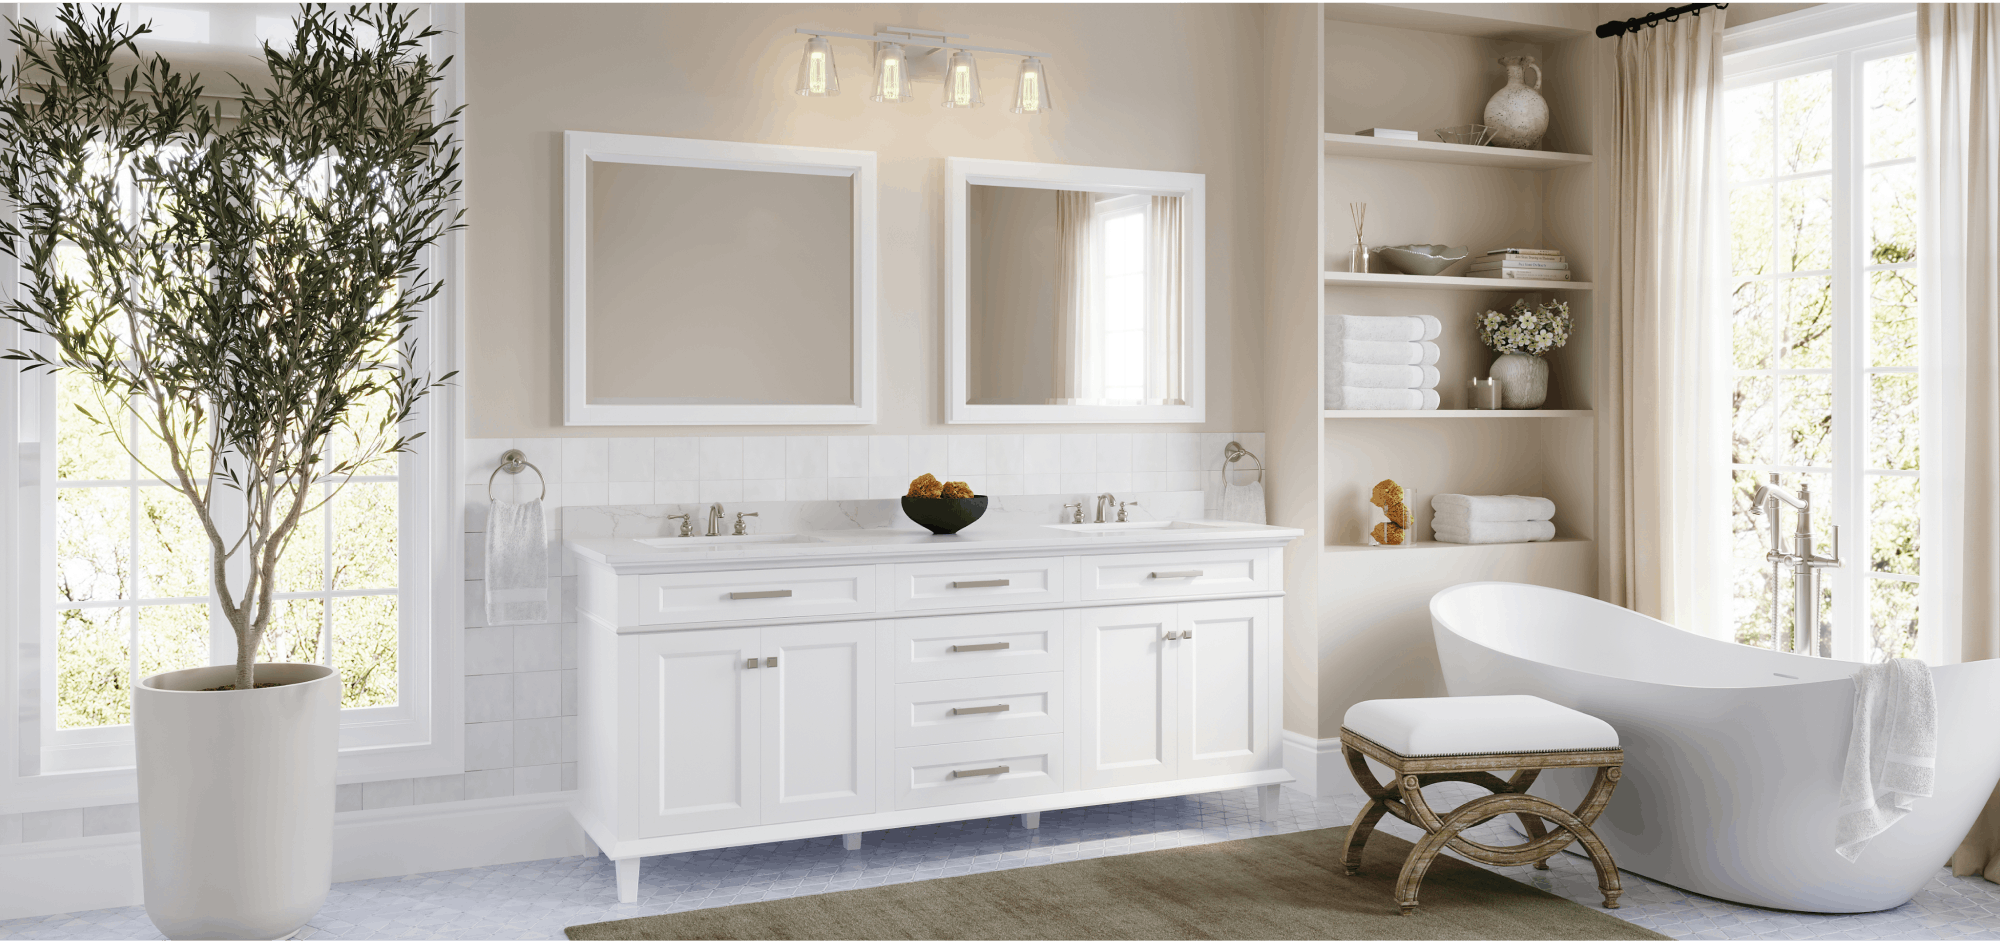 How To Choose A Rug For Your Double Vanity